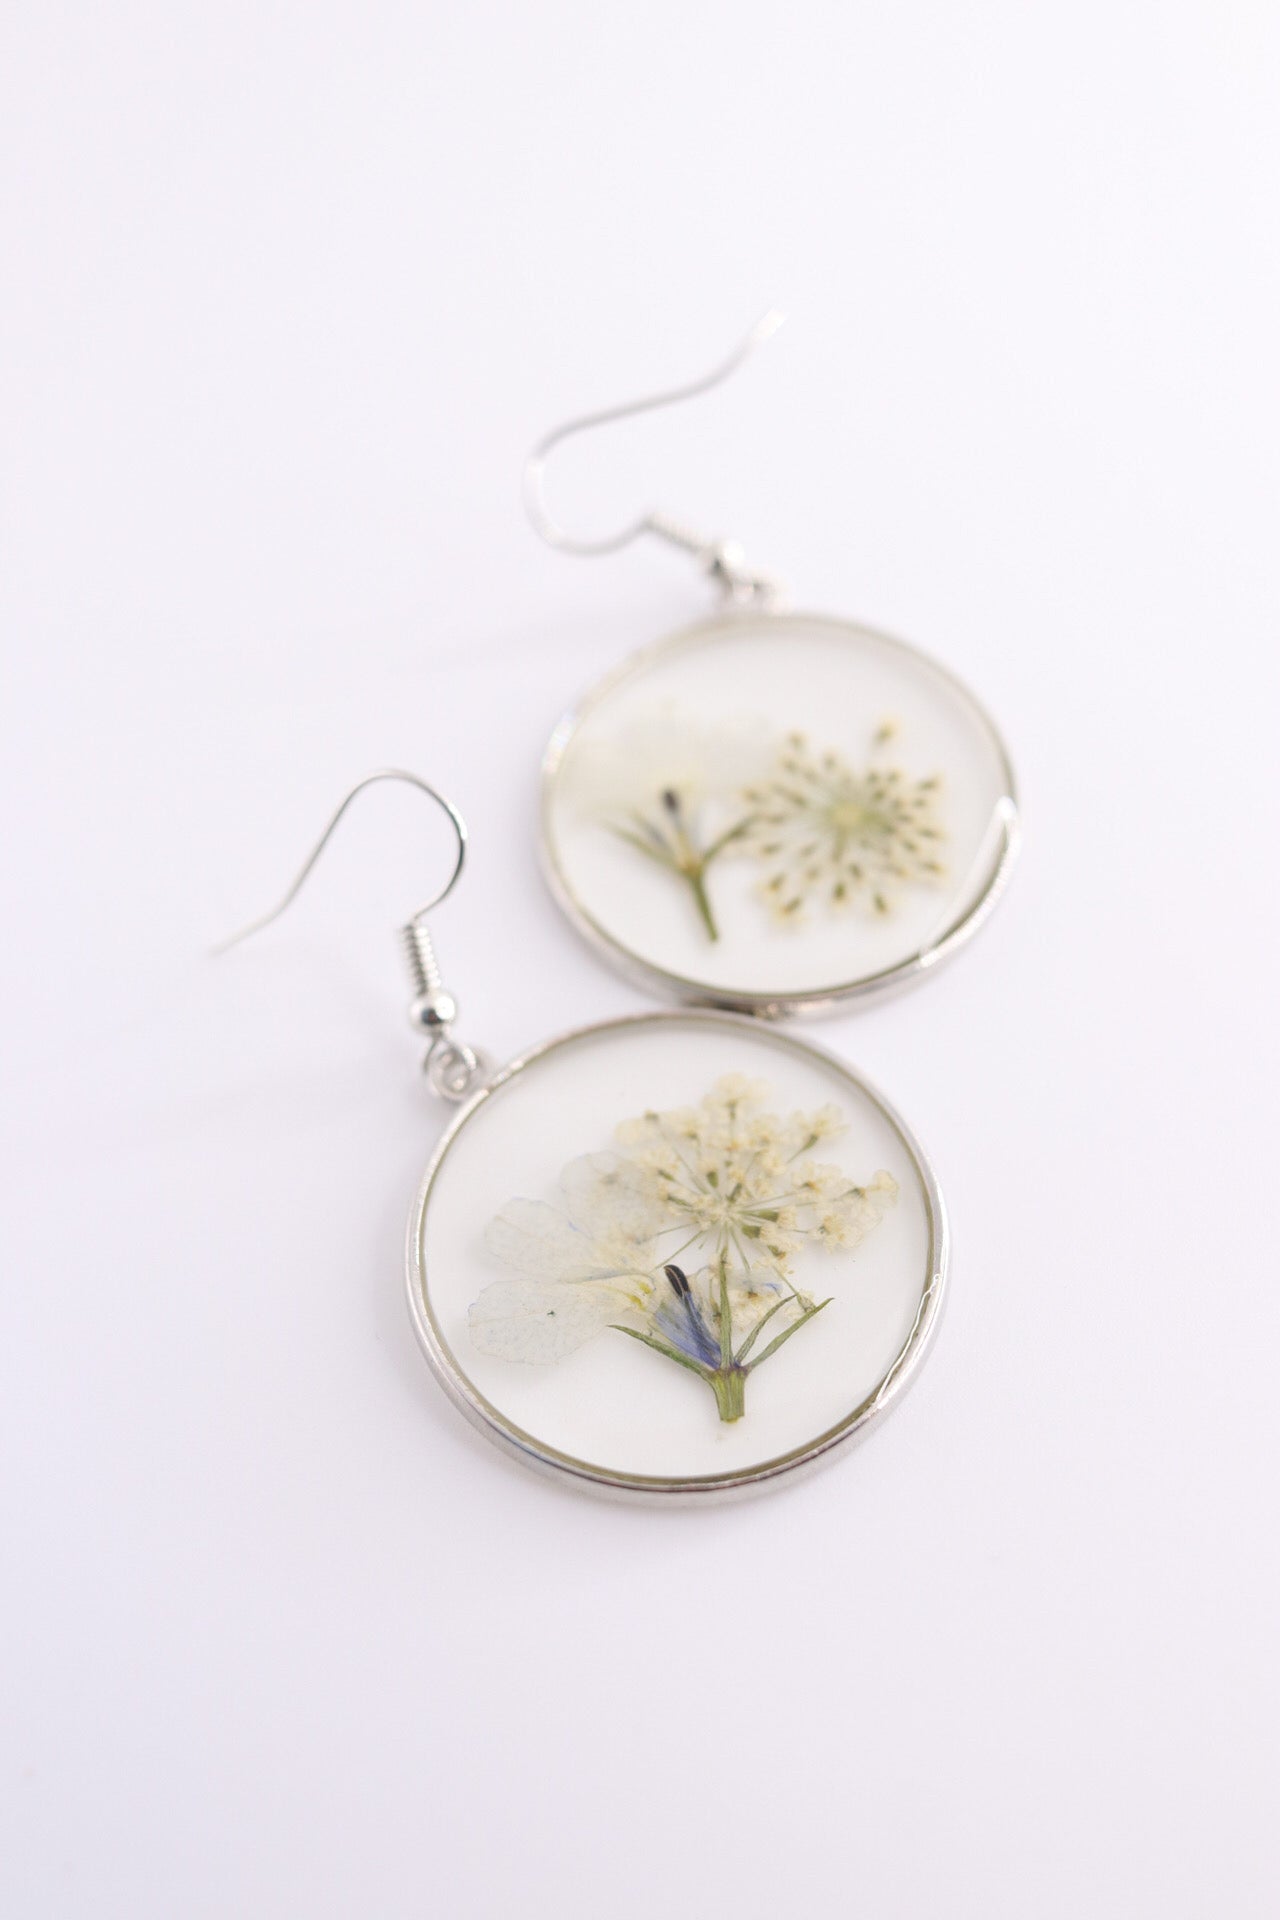 Forget Me Not Earrings Real Pressed Flower Earrings, Botanical Clear Resin Wildflower Silver Earring, Perfect Gift For Her